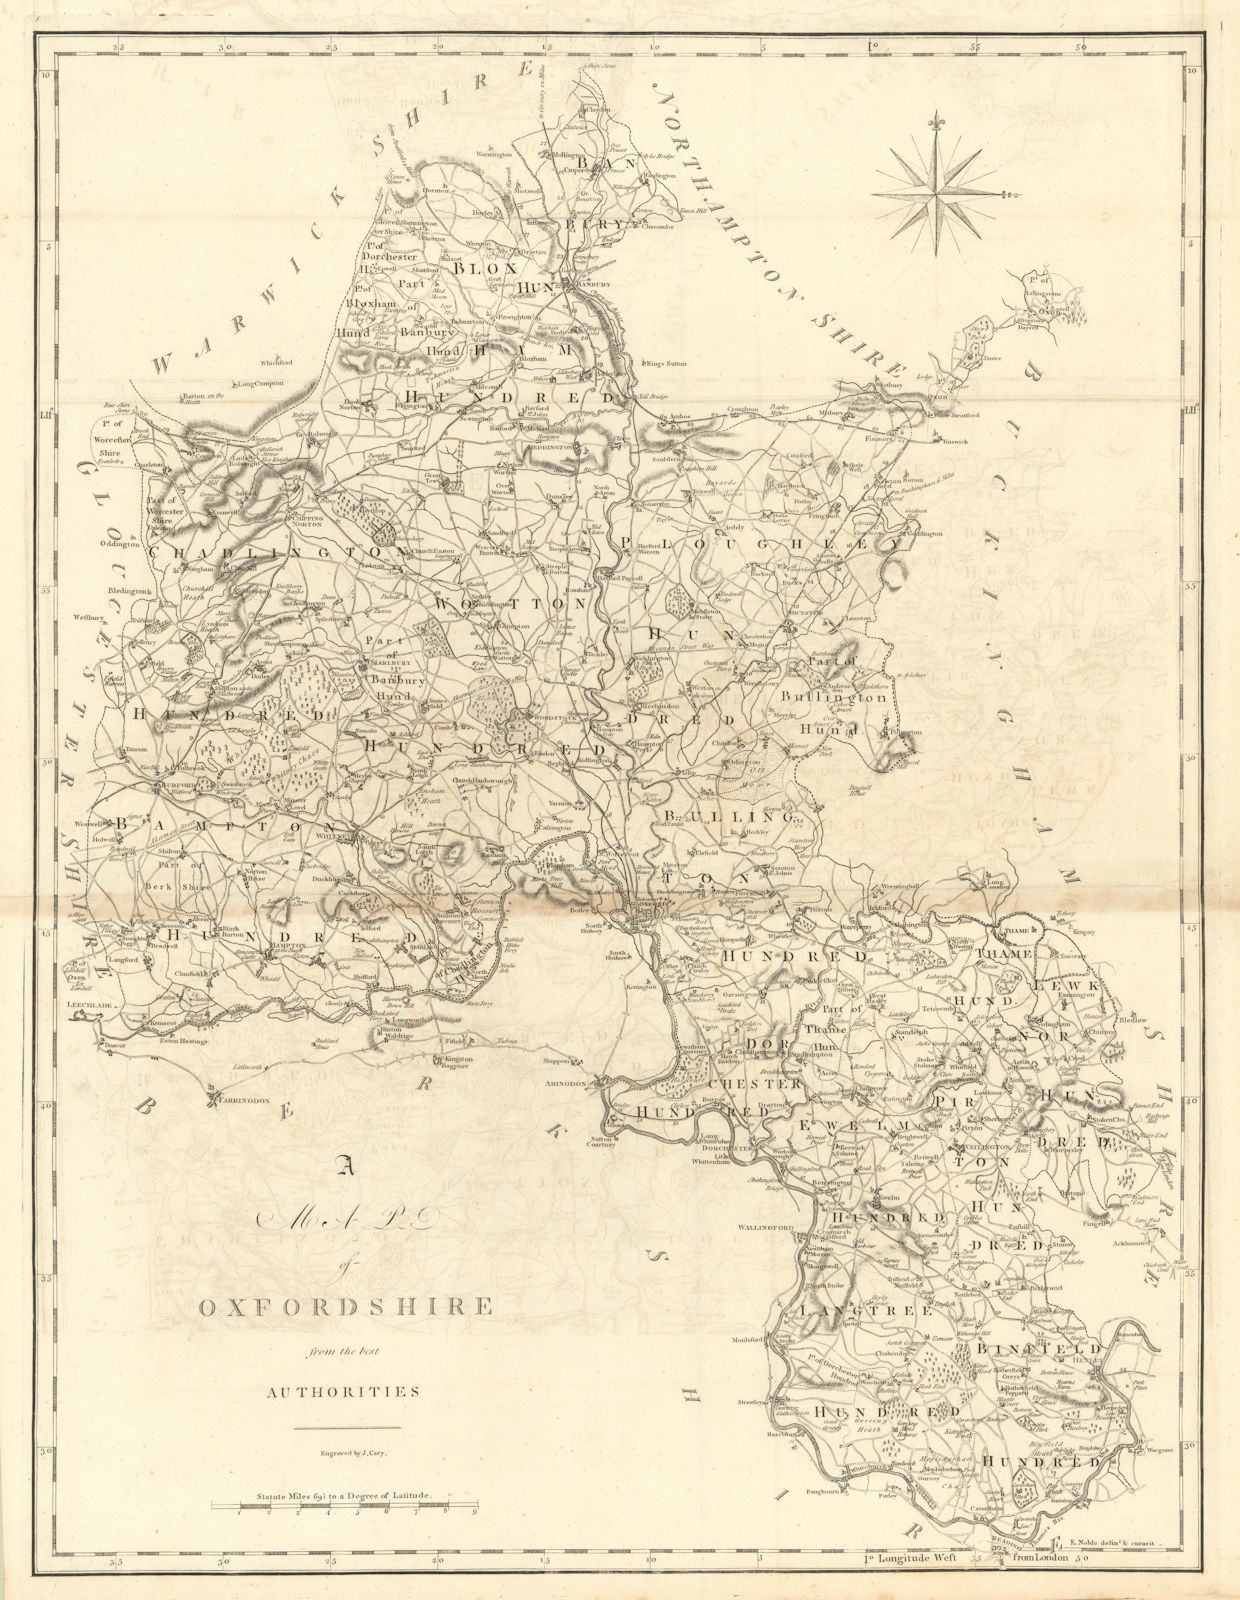 "A map of Oxfordshire from the best authorities". County map. CARY 1789